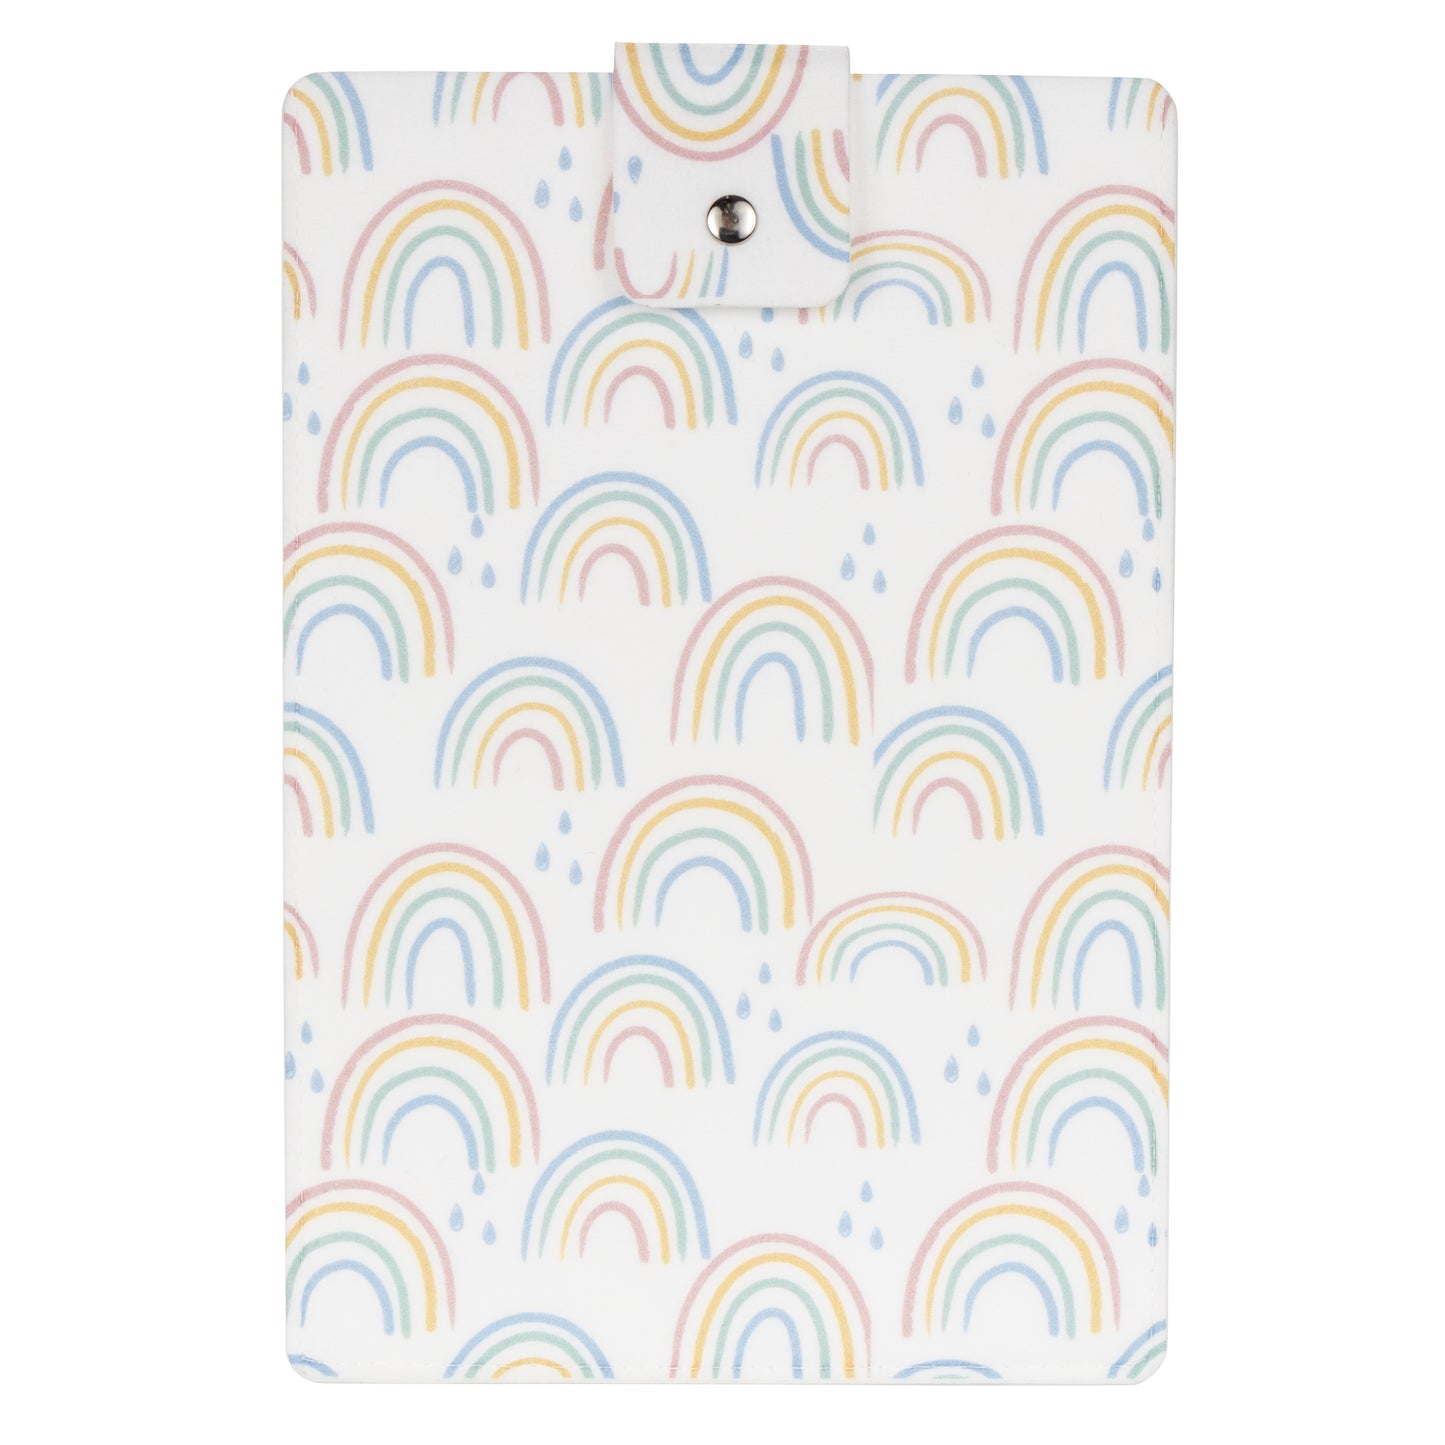 Rainbow Felt Tablet Sleeve Carrying Case - front view with a snap